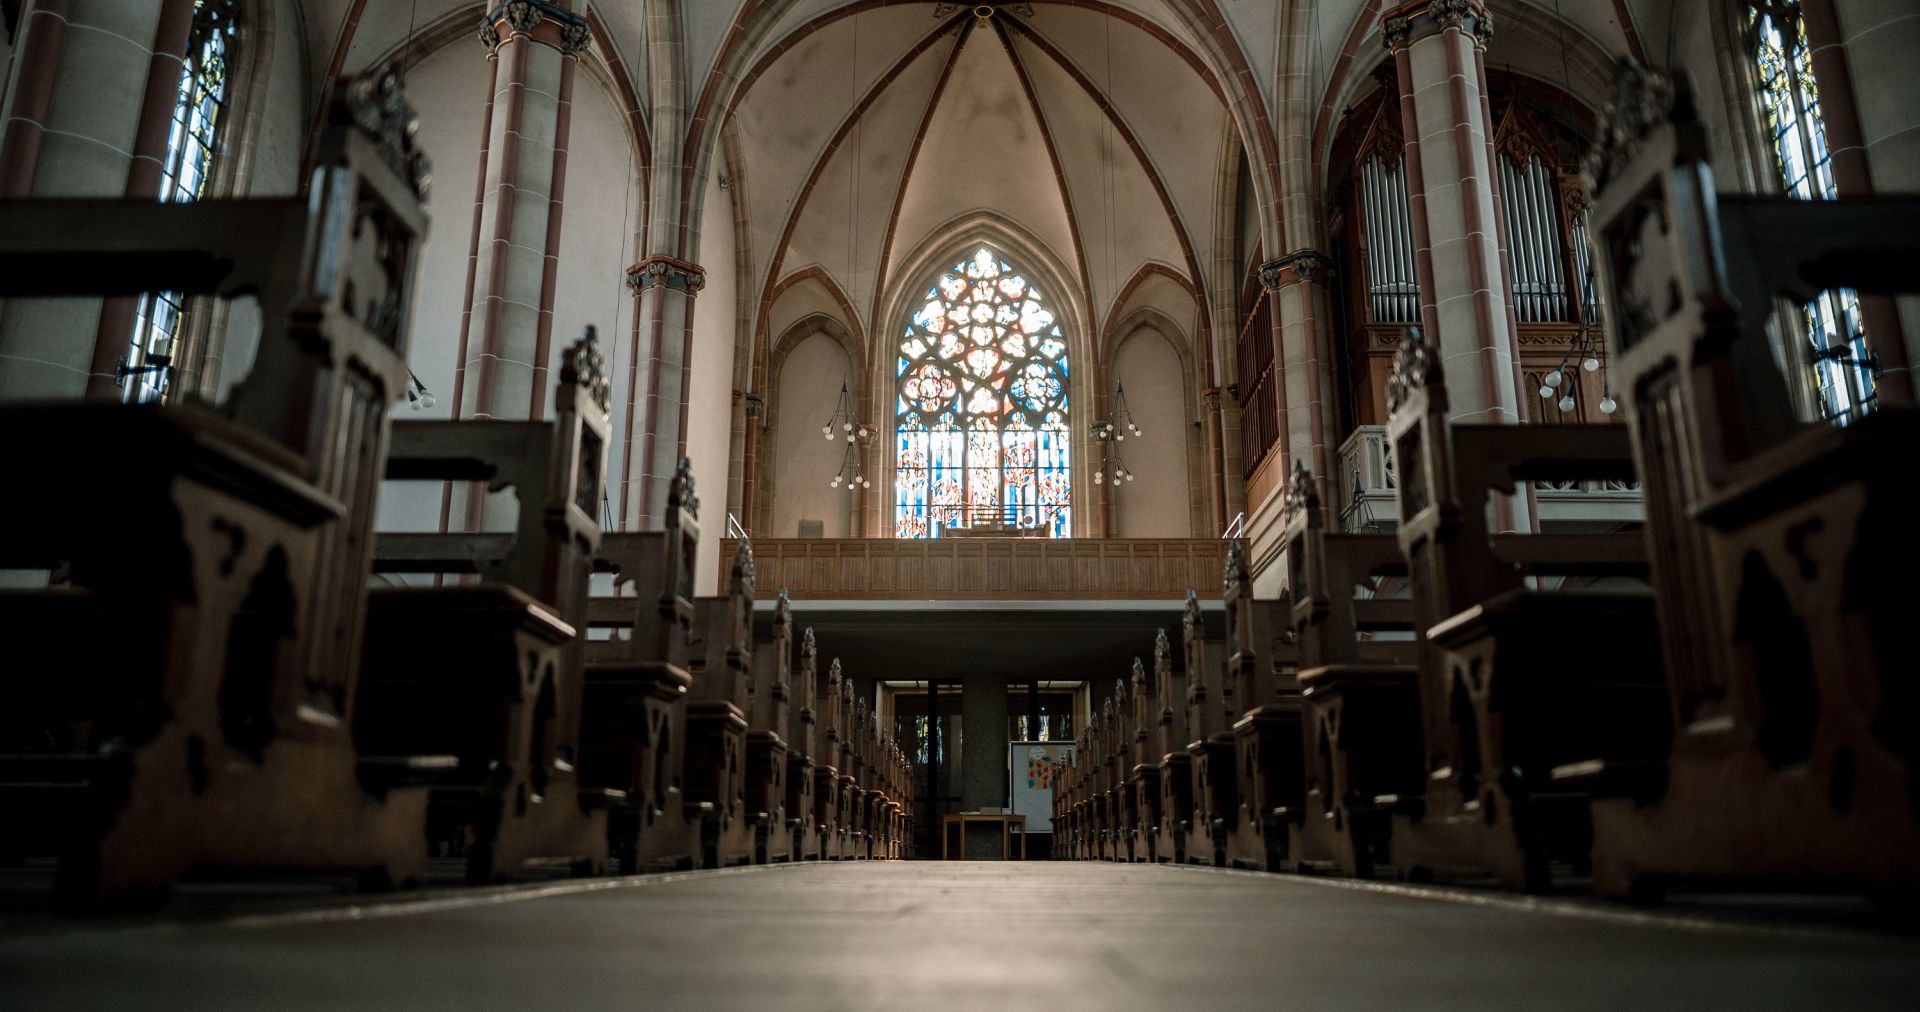 17 March 2020, Oberhausen: The church in Oberhausen-Osterfeld isseen empty as all gatherings are banned in Germany to slow down the spread of Coronavirus (Covid-19). The Catholic priest Christoph Wichmann of the church reacted to the ban on services by calling the people to light a candle at 7 pm in the evening and place it on the windowsill and then pray the Lord's Prayer, as  Germany has introduced drastic restrictions on public life and gatherings as part of efforts to curb the spread of the coronavirus (Covid-19). Photo: Fabian Strauch/dpa